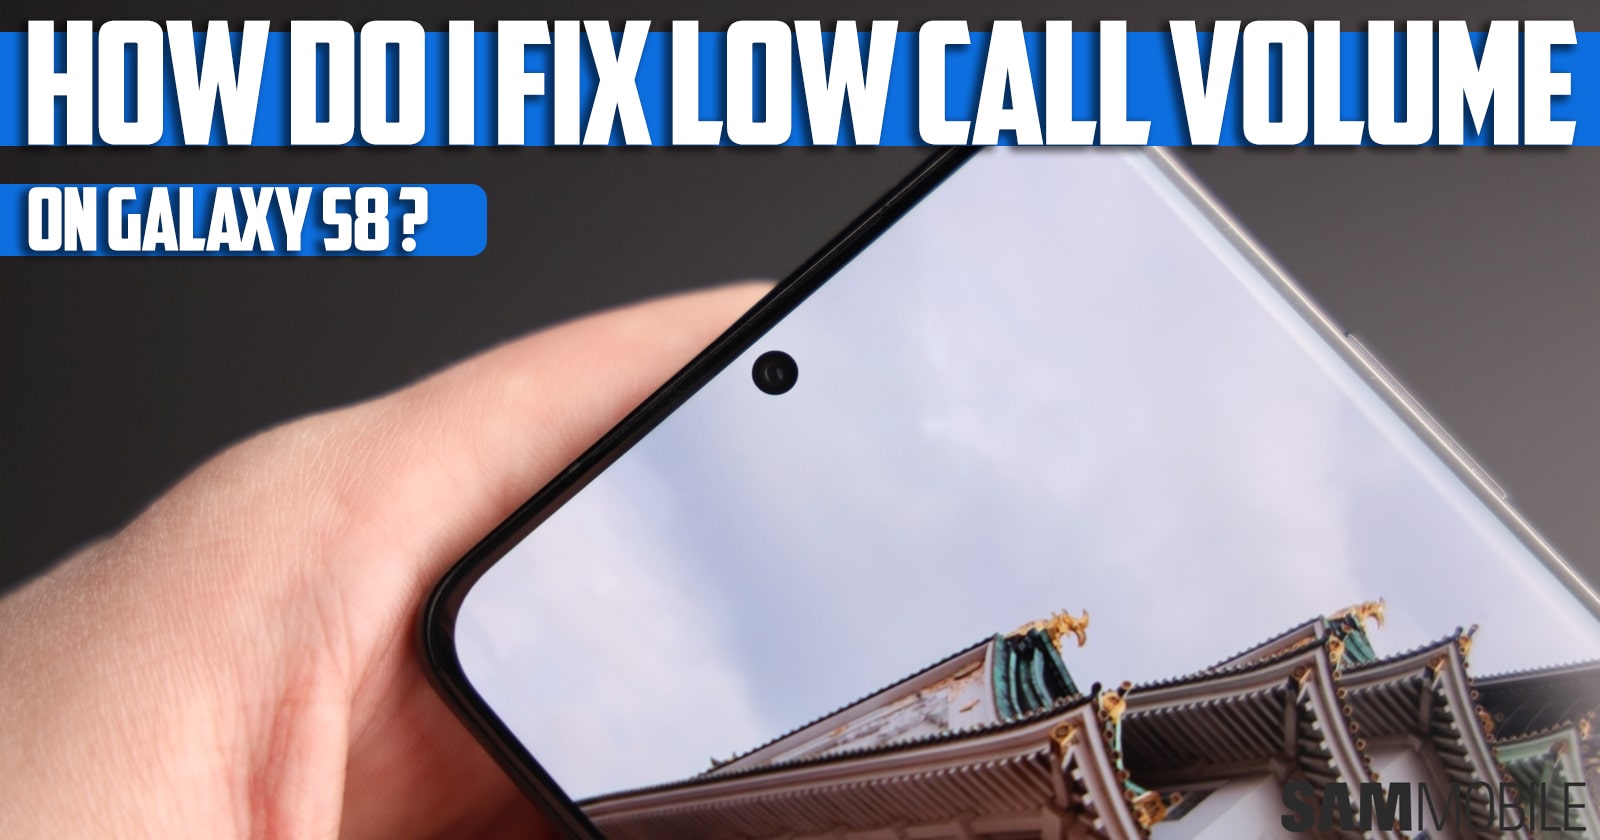 How do i-fix low call volume on galaxy s8